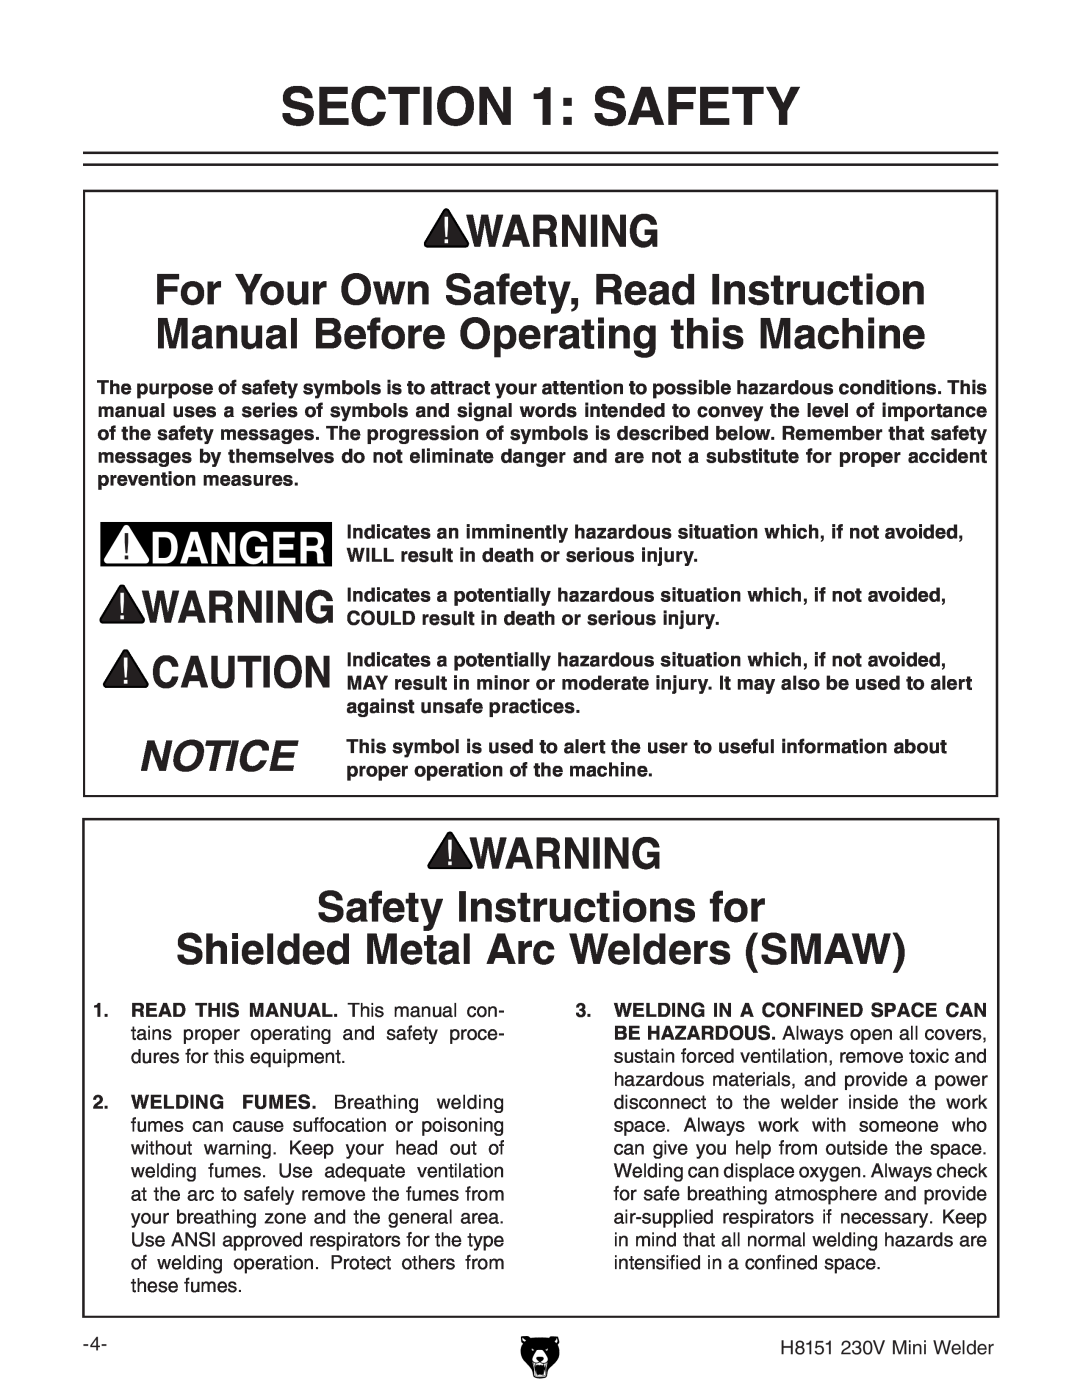 Grizzly H8151, 230V owner manual Safety Instructions for Shielded Metal Arc Welders SMAW 